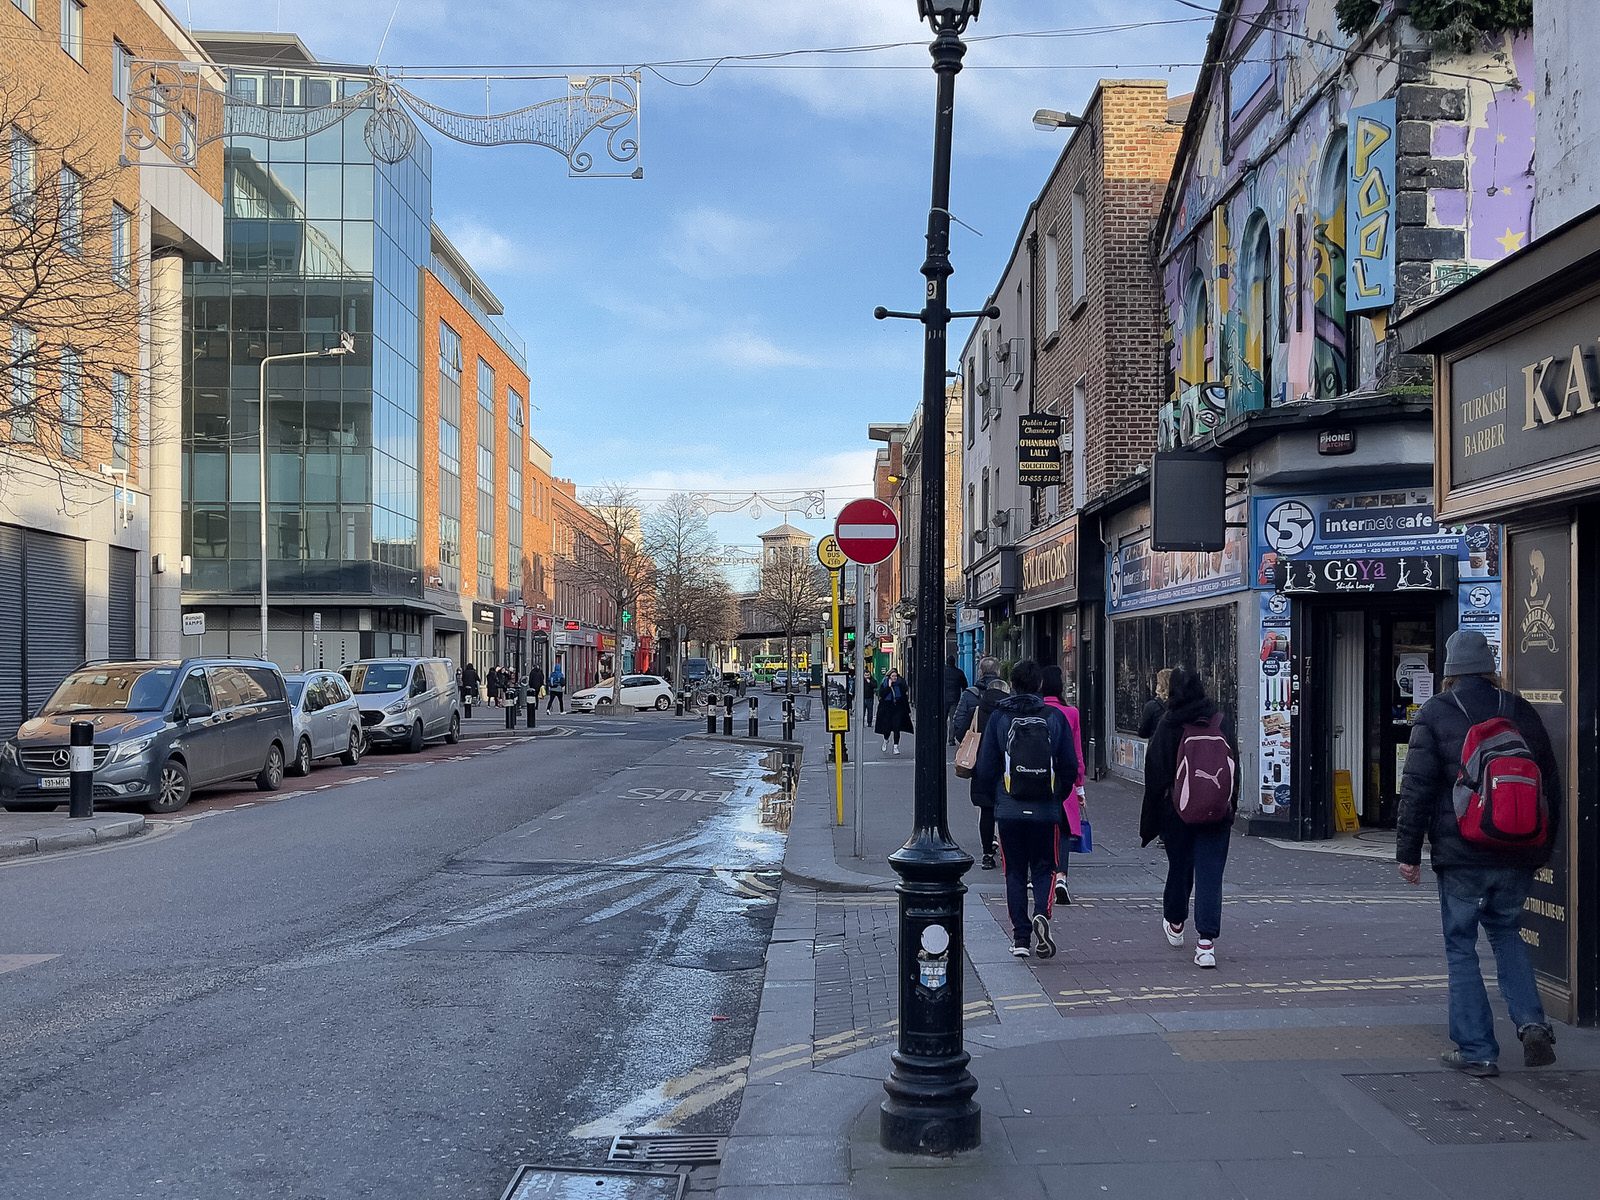 TALBOT STREET [FAILS TO MEET ITS POTENTIAL AS A MAJOR SHOPPING STREET]-225734-1